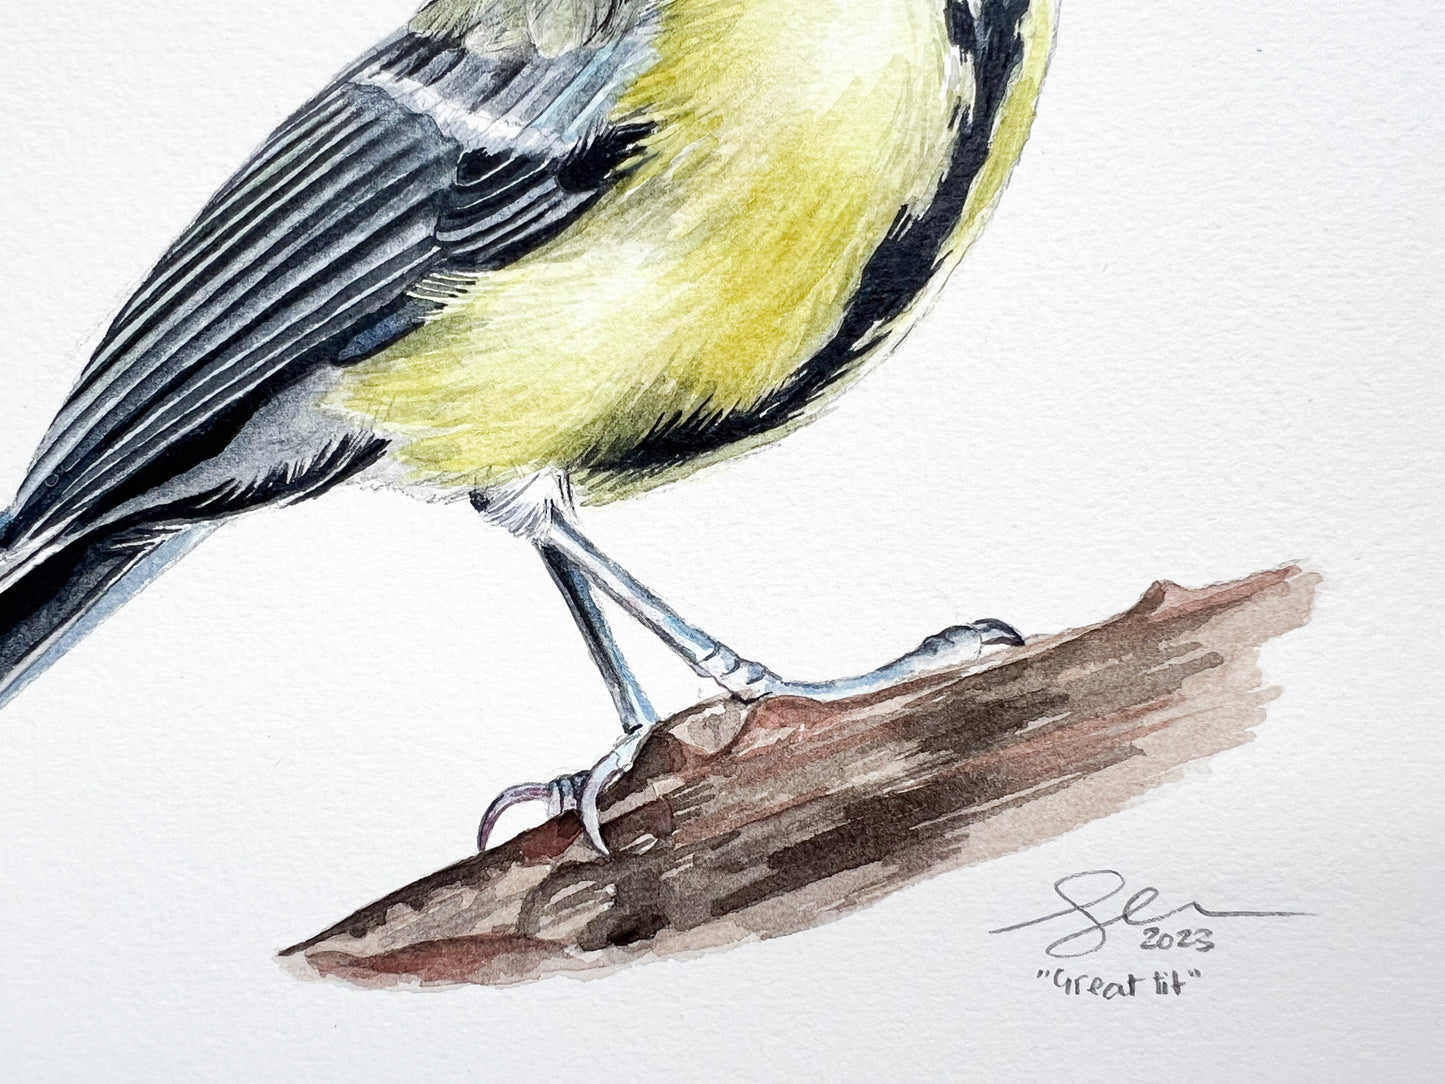 An original watercolour painting of a great tit